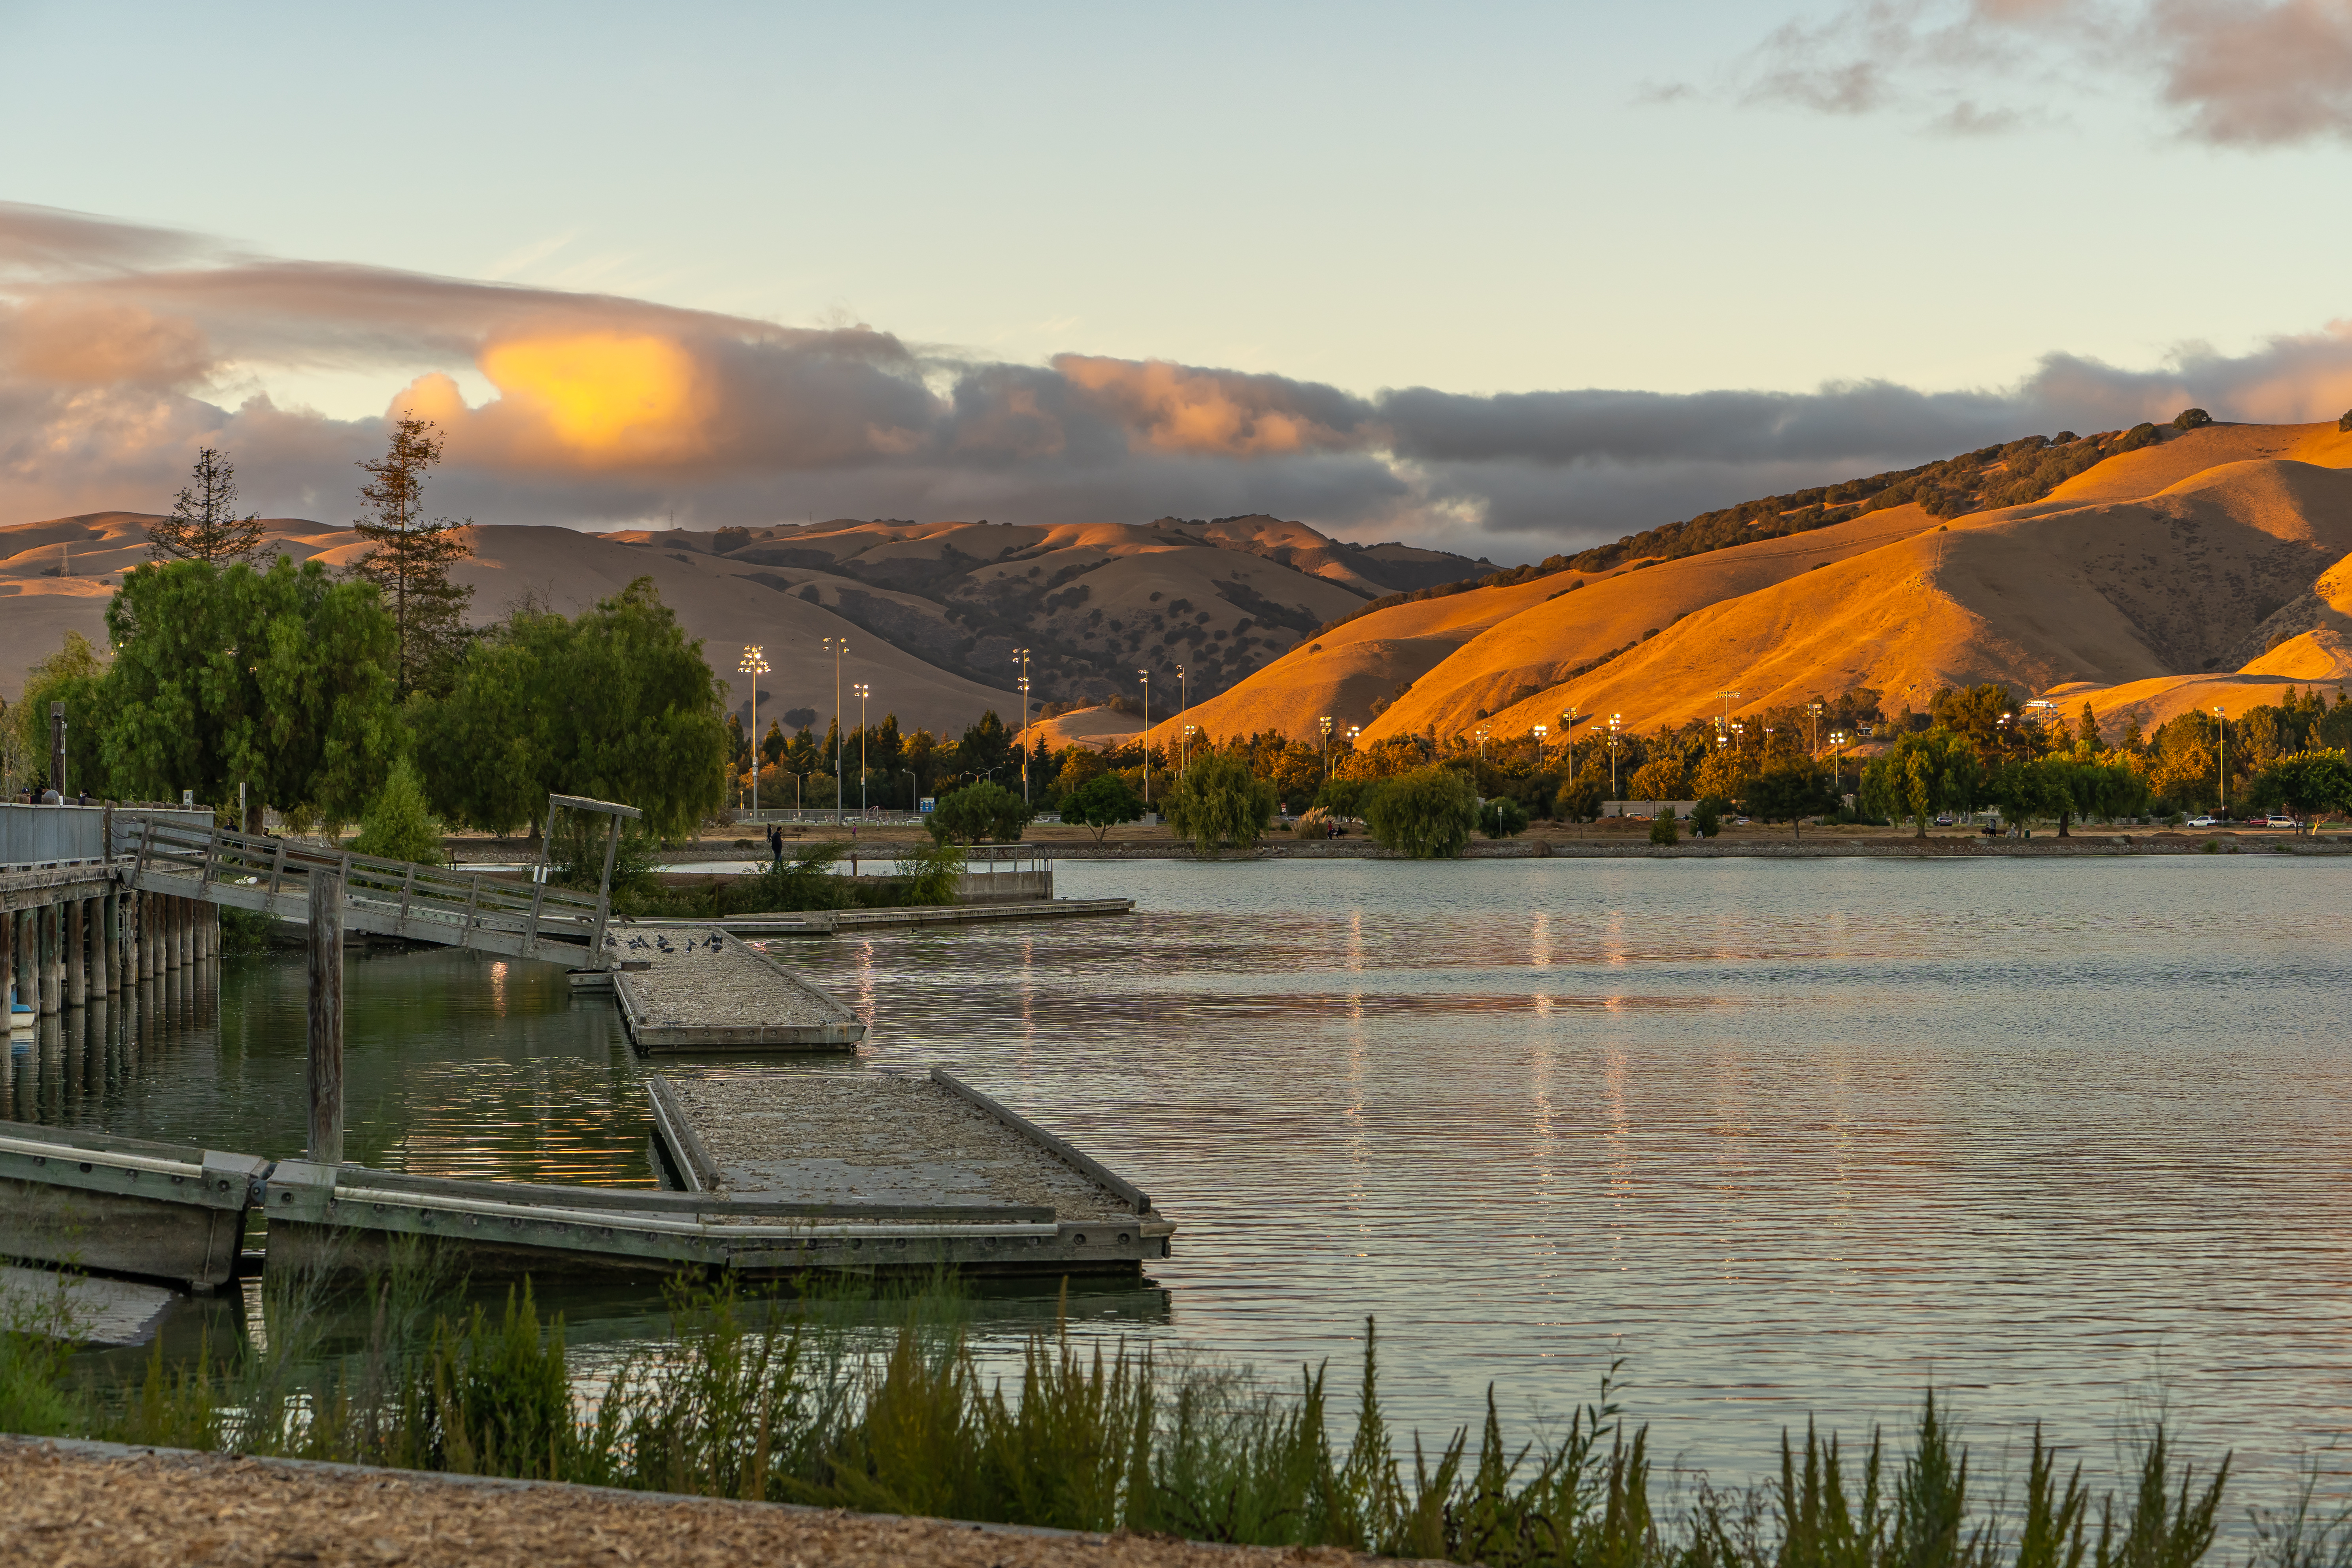 A loading dock next to open water with large hills in the background during a golden hour sunset